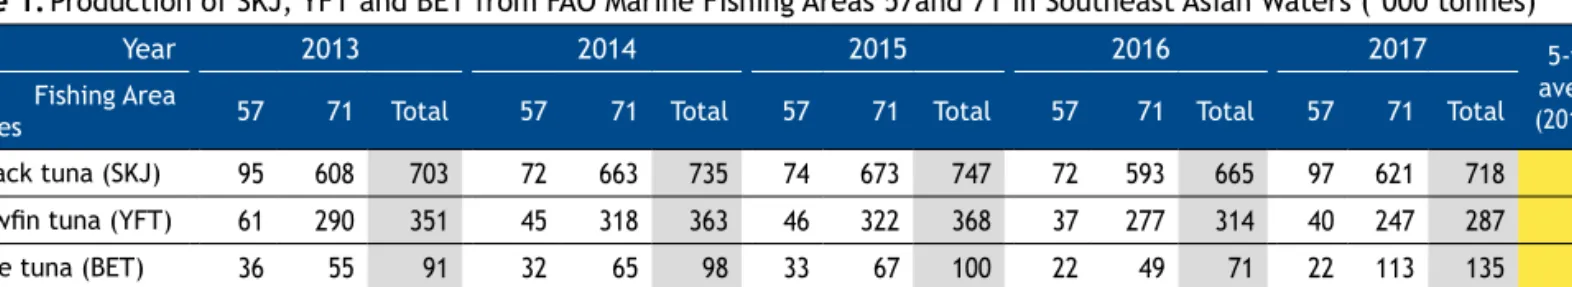 Figure 3. FAO Marine Fishing Area 71 in Southeast Asia covers the  marine fishing areas of Thailand (Gulf of Thailand), Cambodia, 